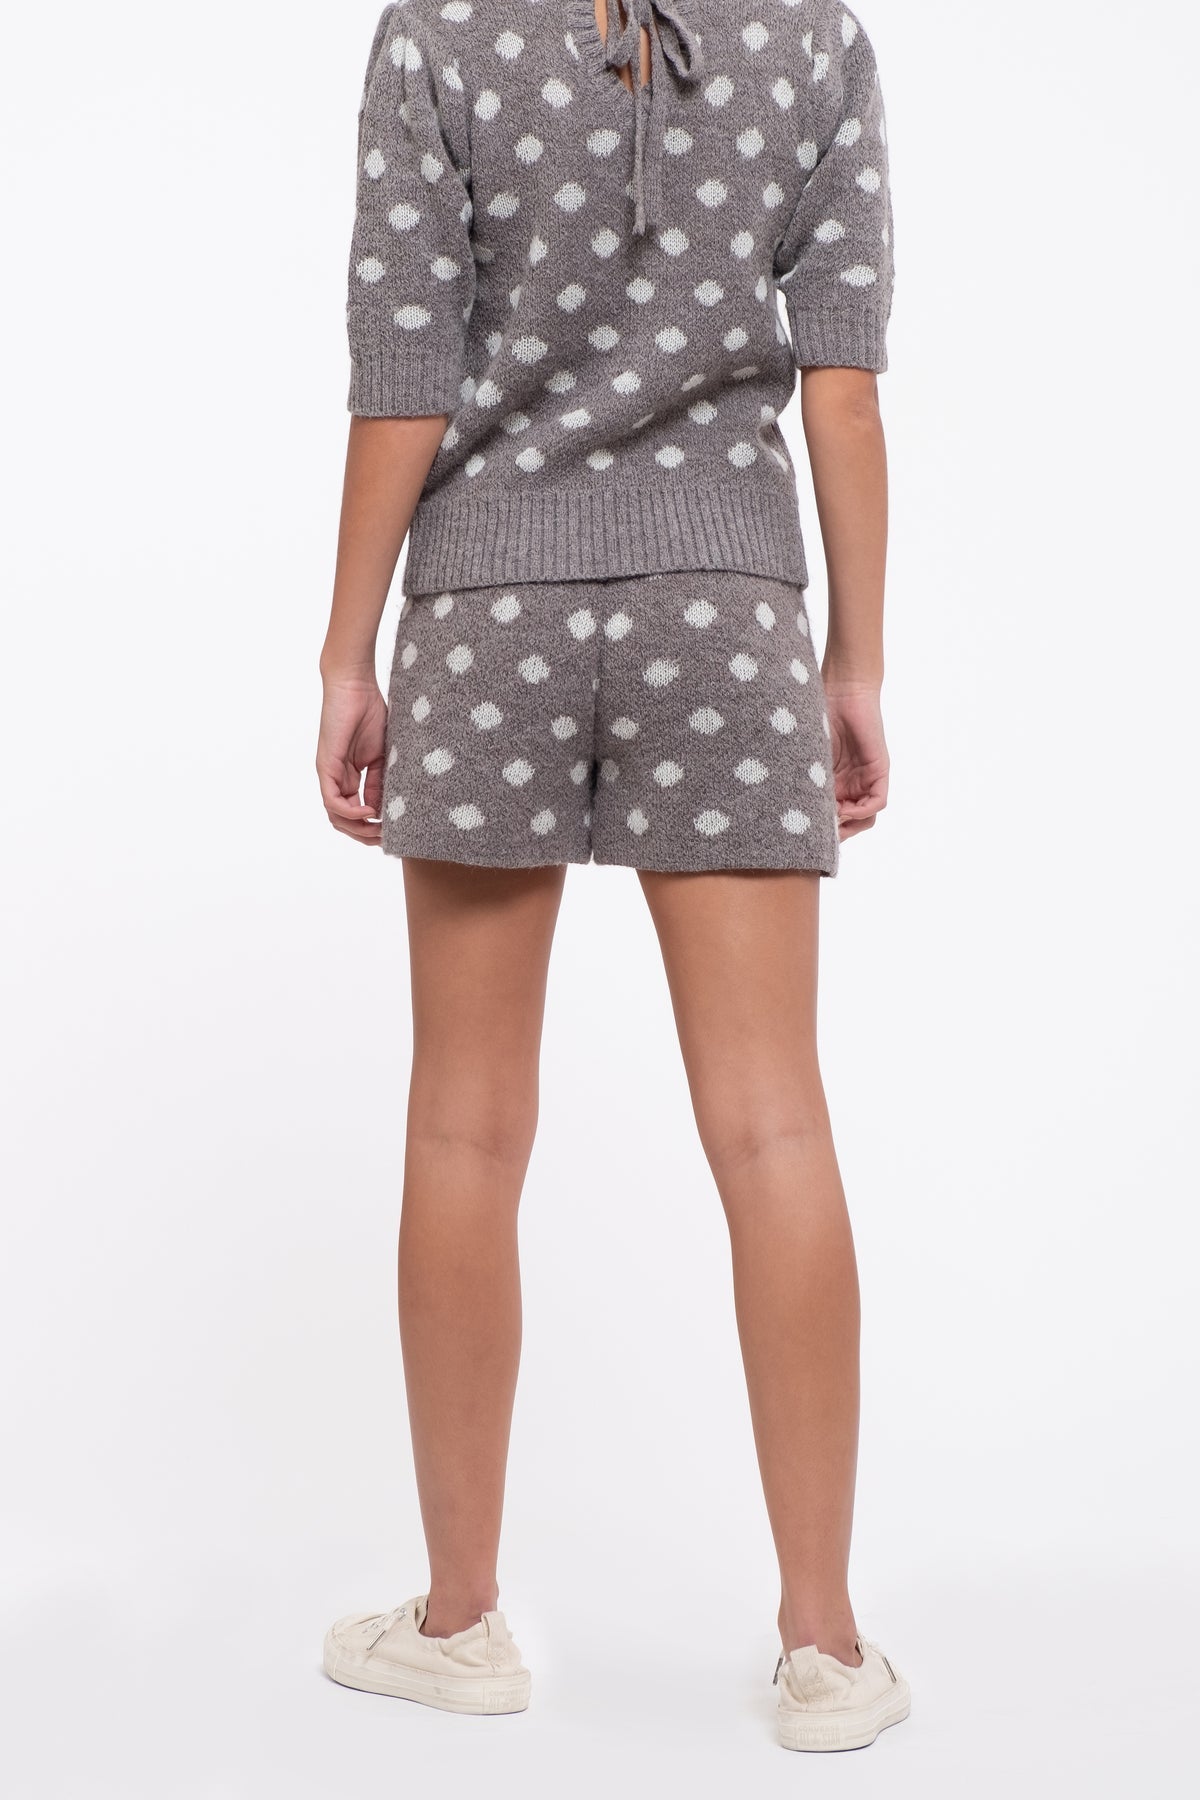 Dotted High Waisted Knit Lounge Shorts.